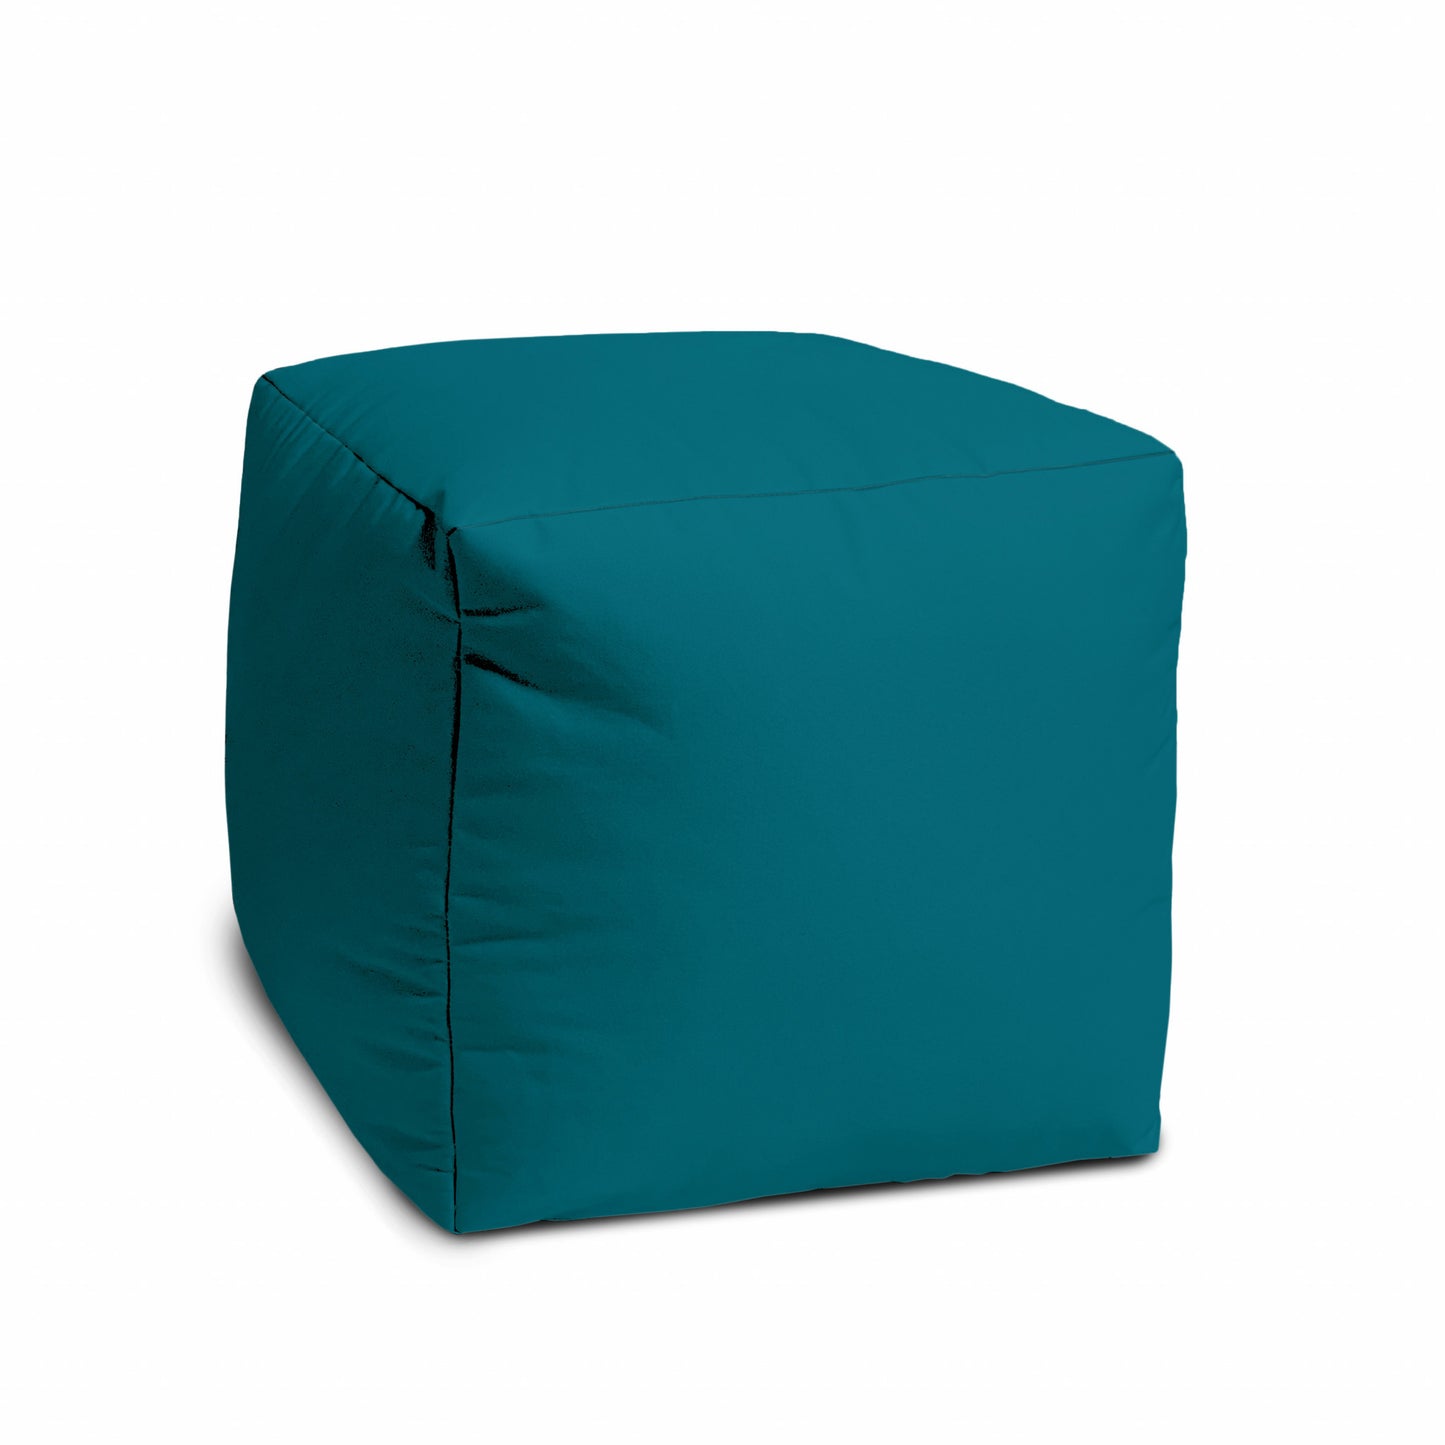 17" Cool Dark Teal Solid Color Indoor Outdoor Pouf Ottoman